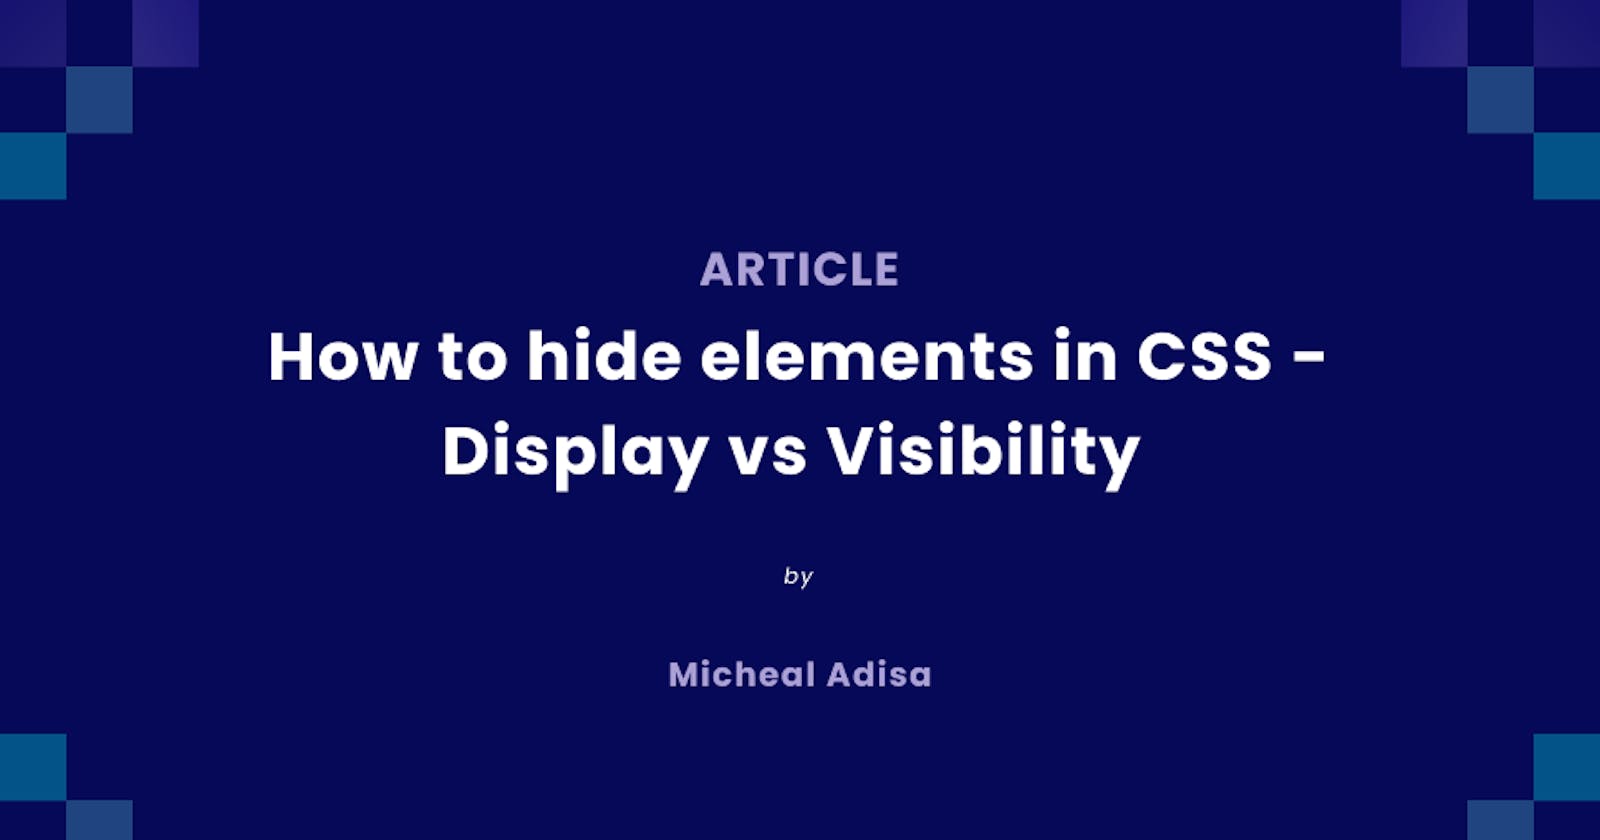 How to hide elements in CSS - Display vs Visibility